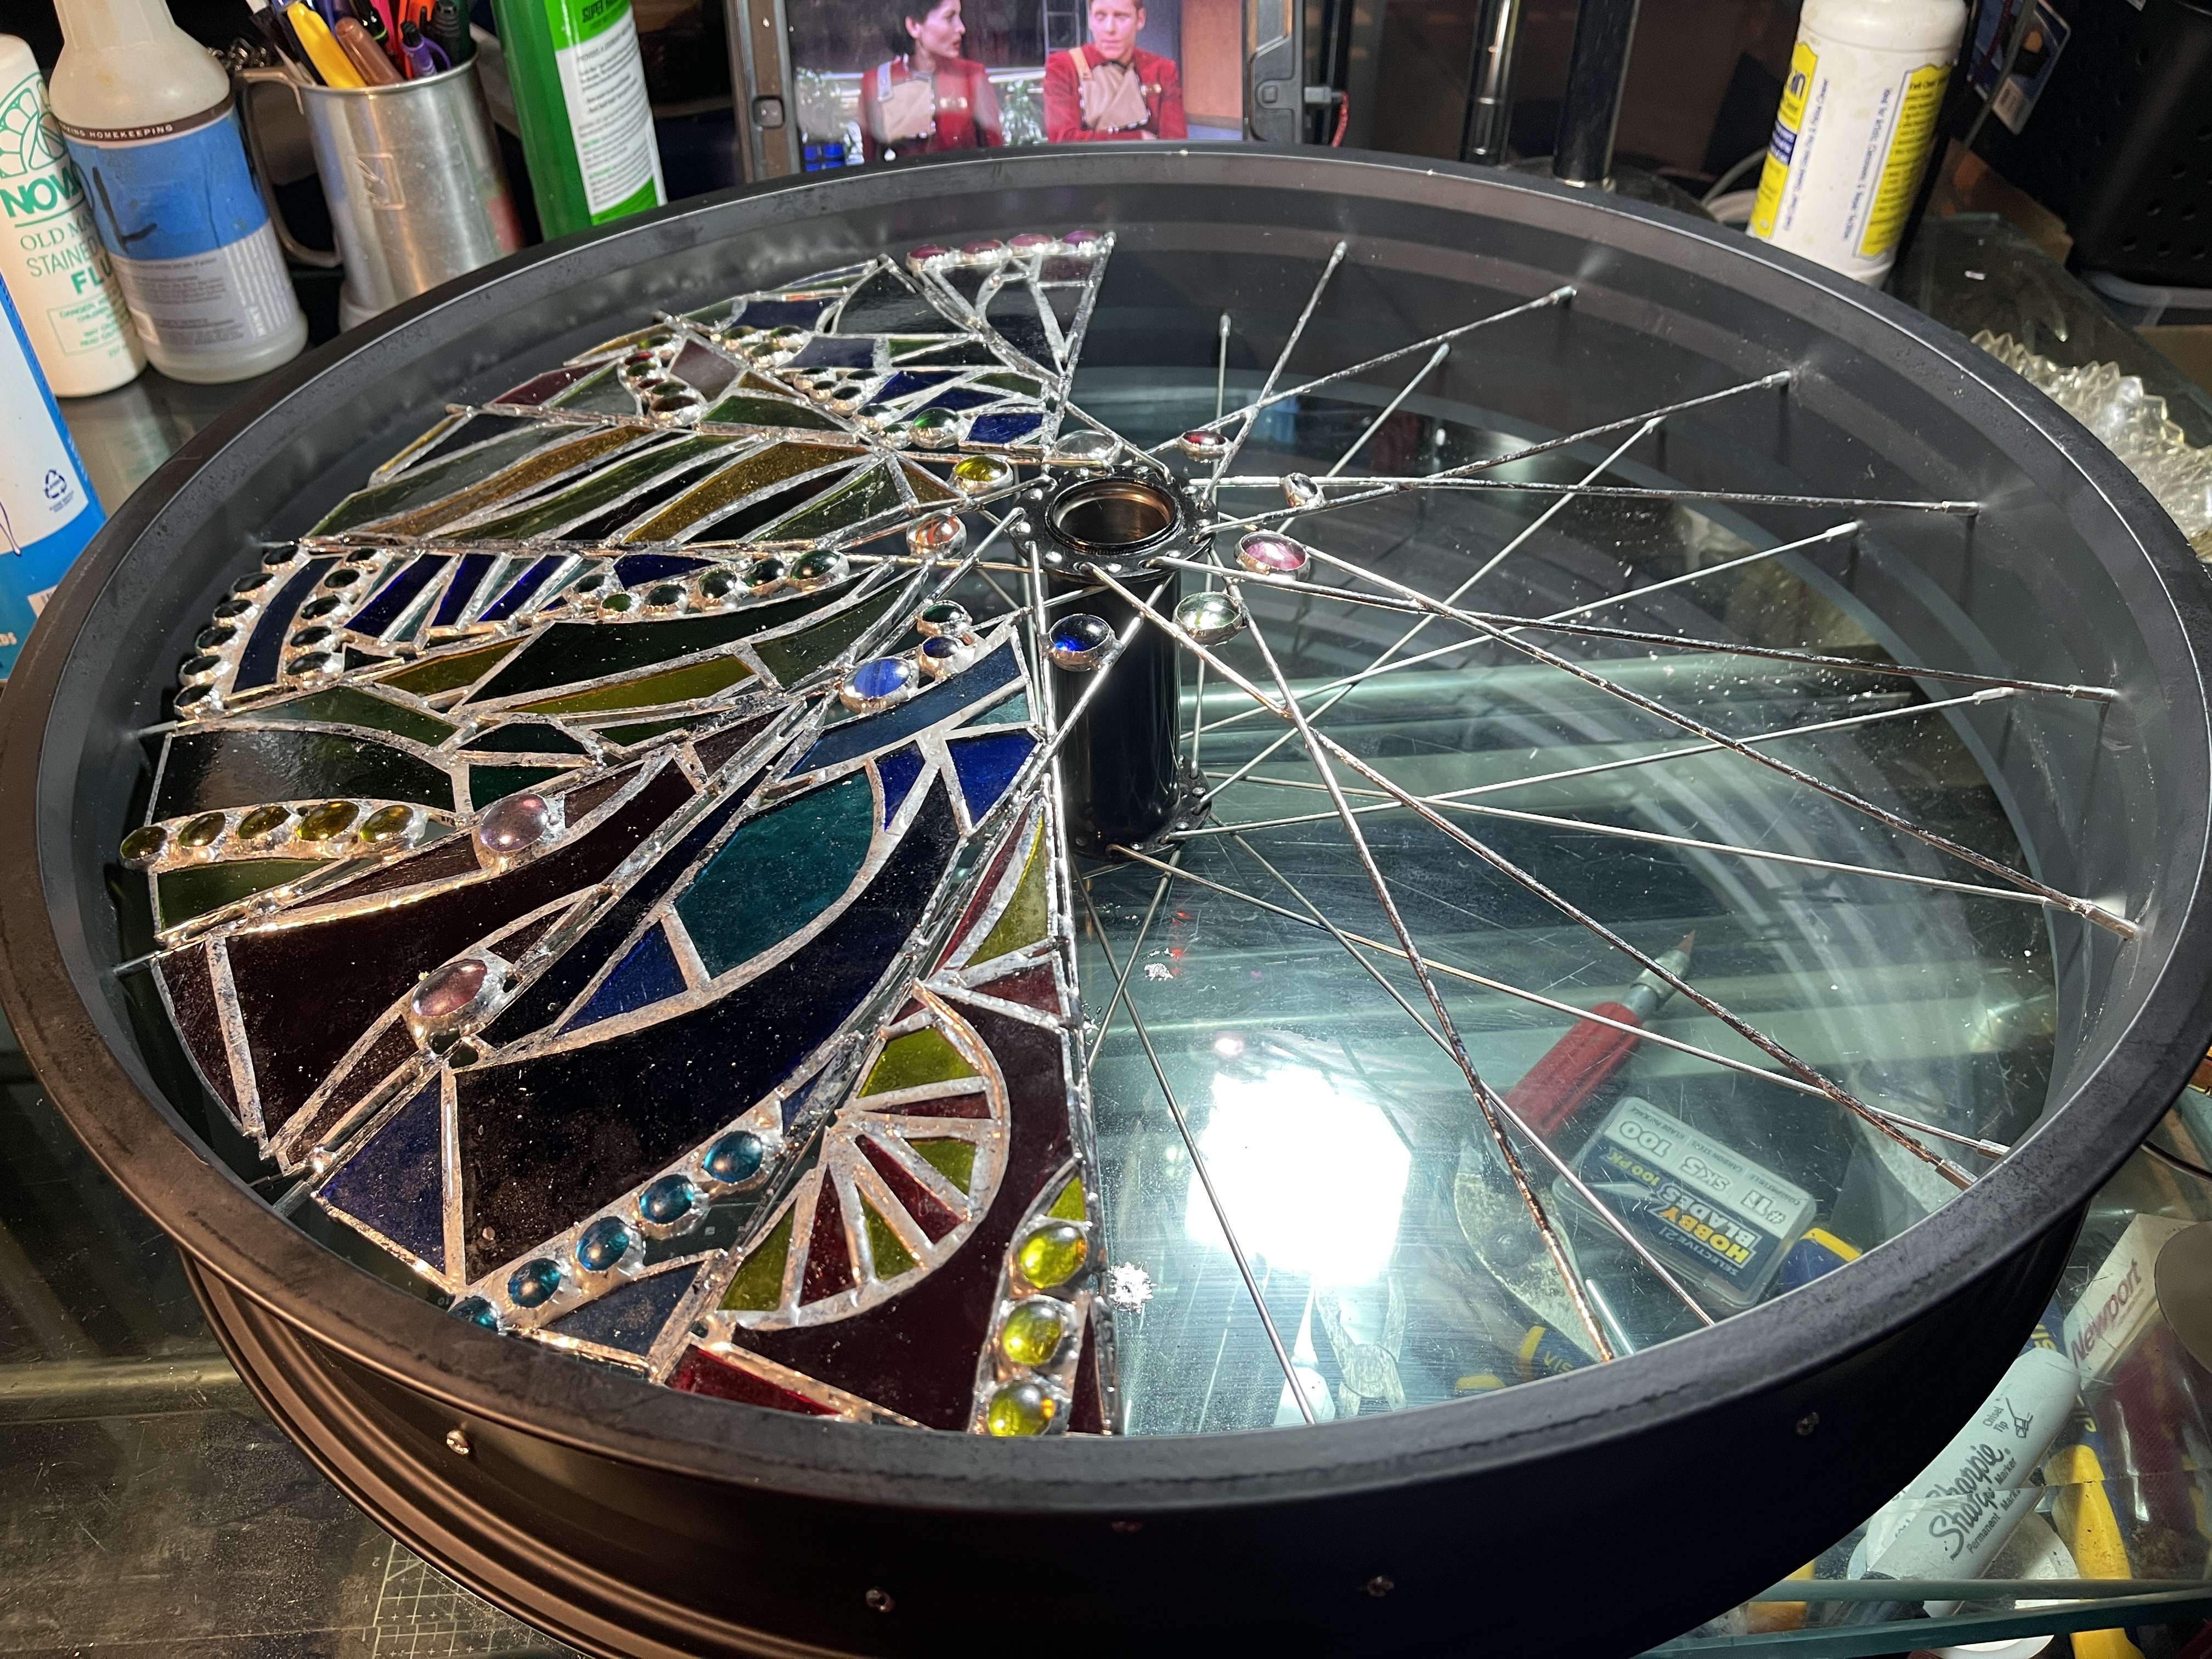 Stained glass panels in process of being inserted between bicycle wheel spokes